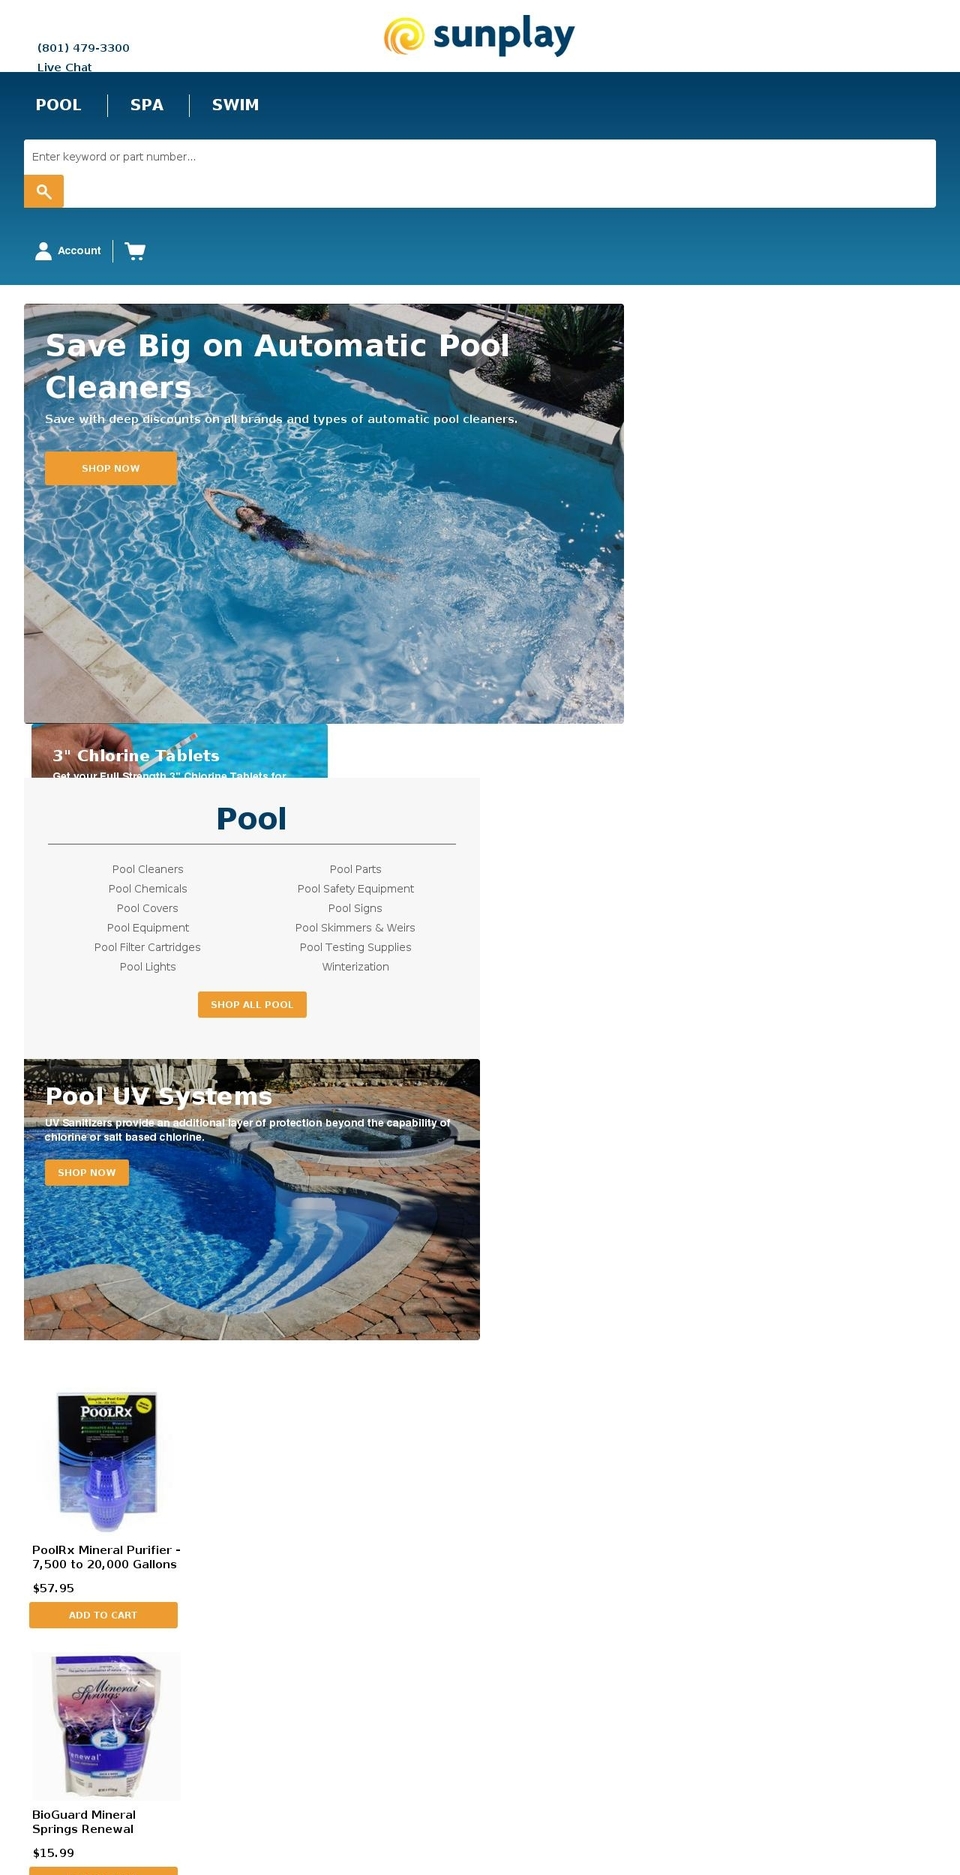 Sunplay v1.0 [Speck - Collection] Shopify theme site example sunplaylandscaping.com